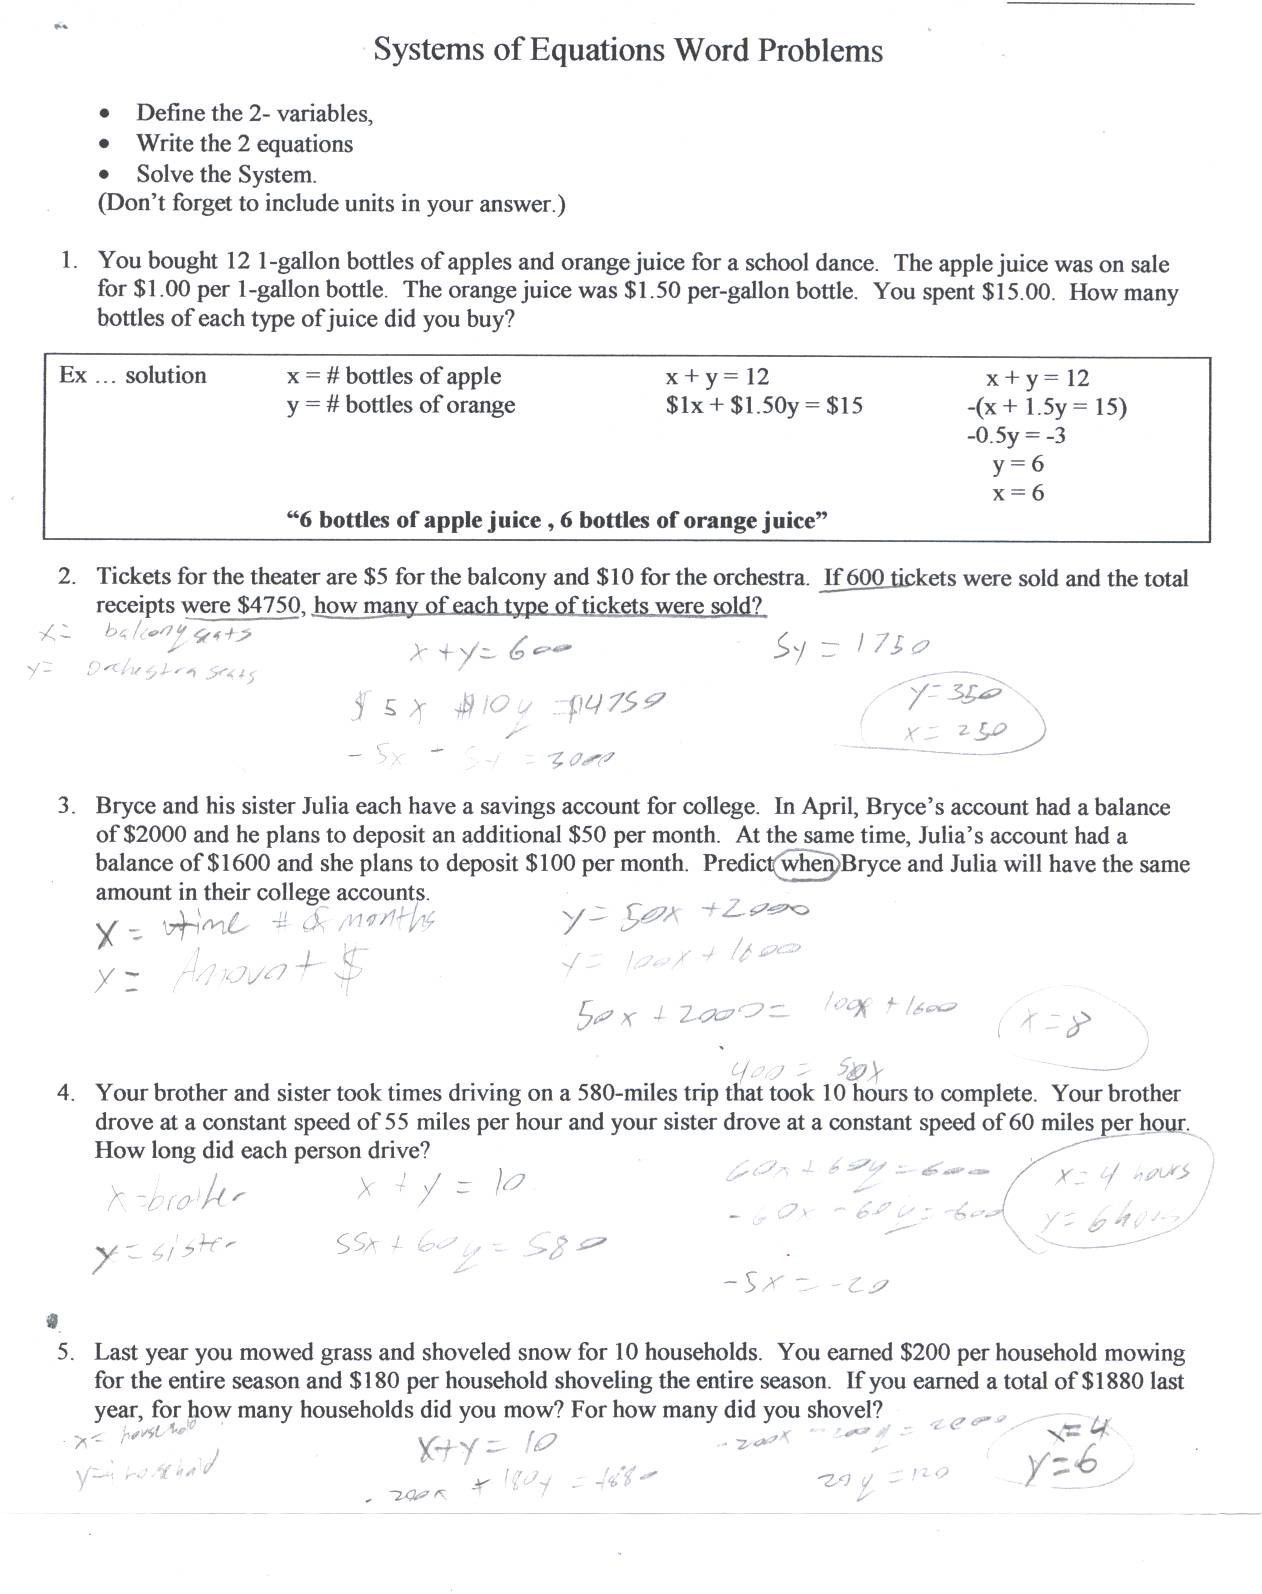 solving systems of equations word problems exam answers